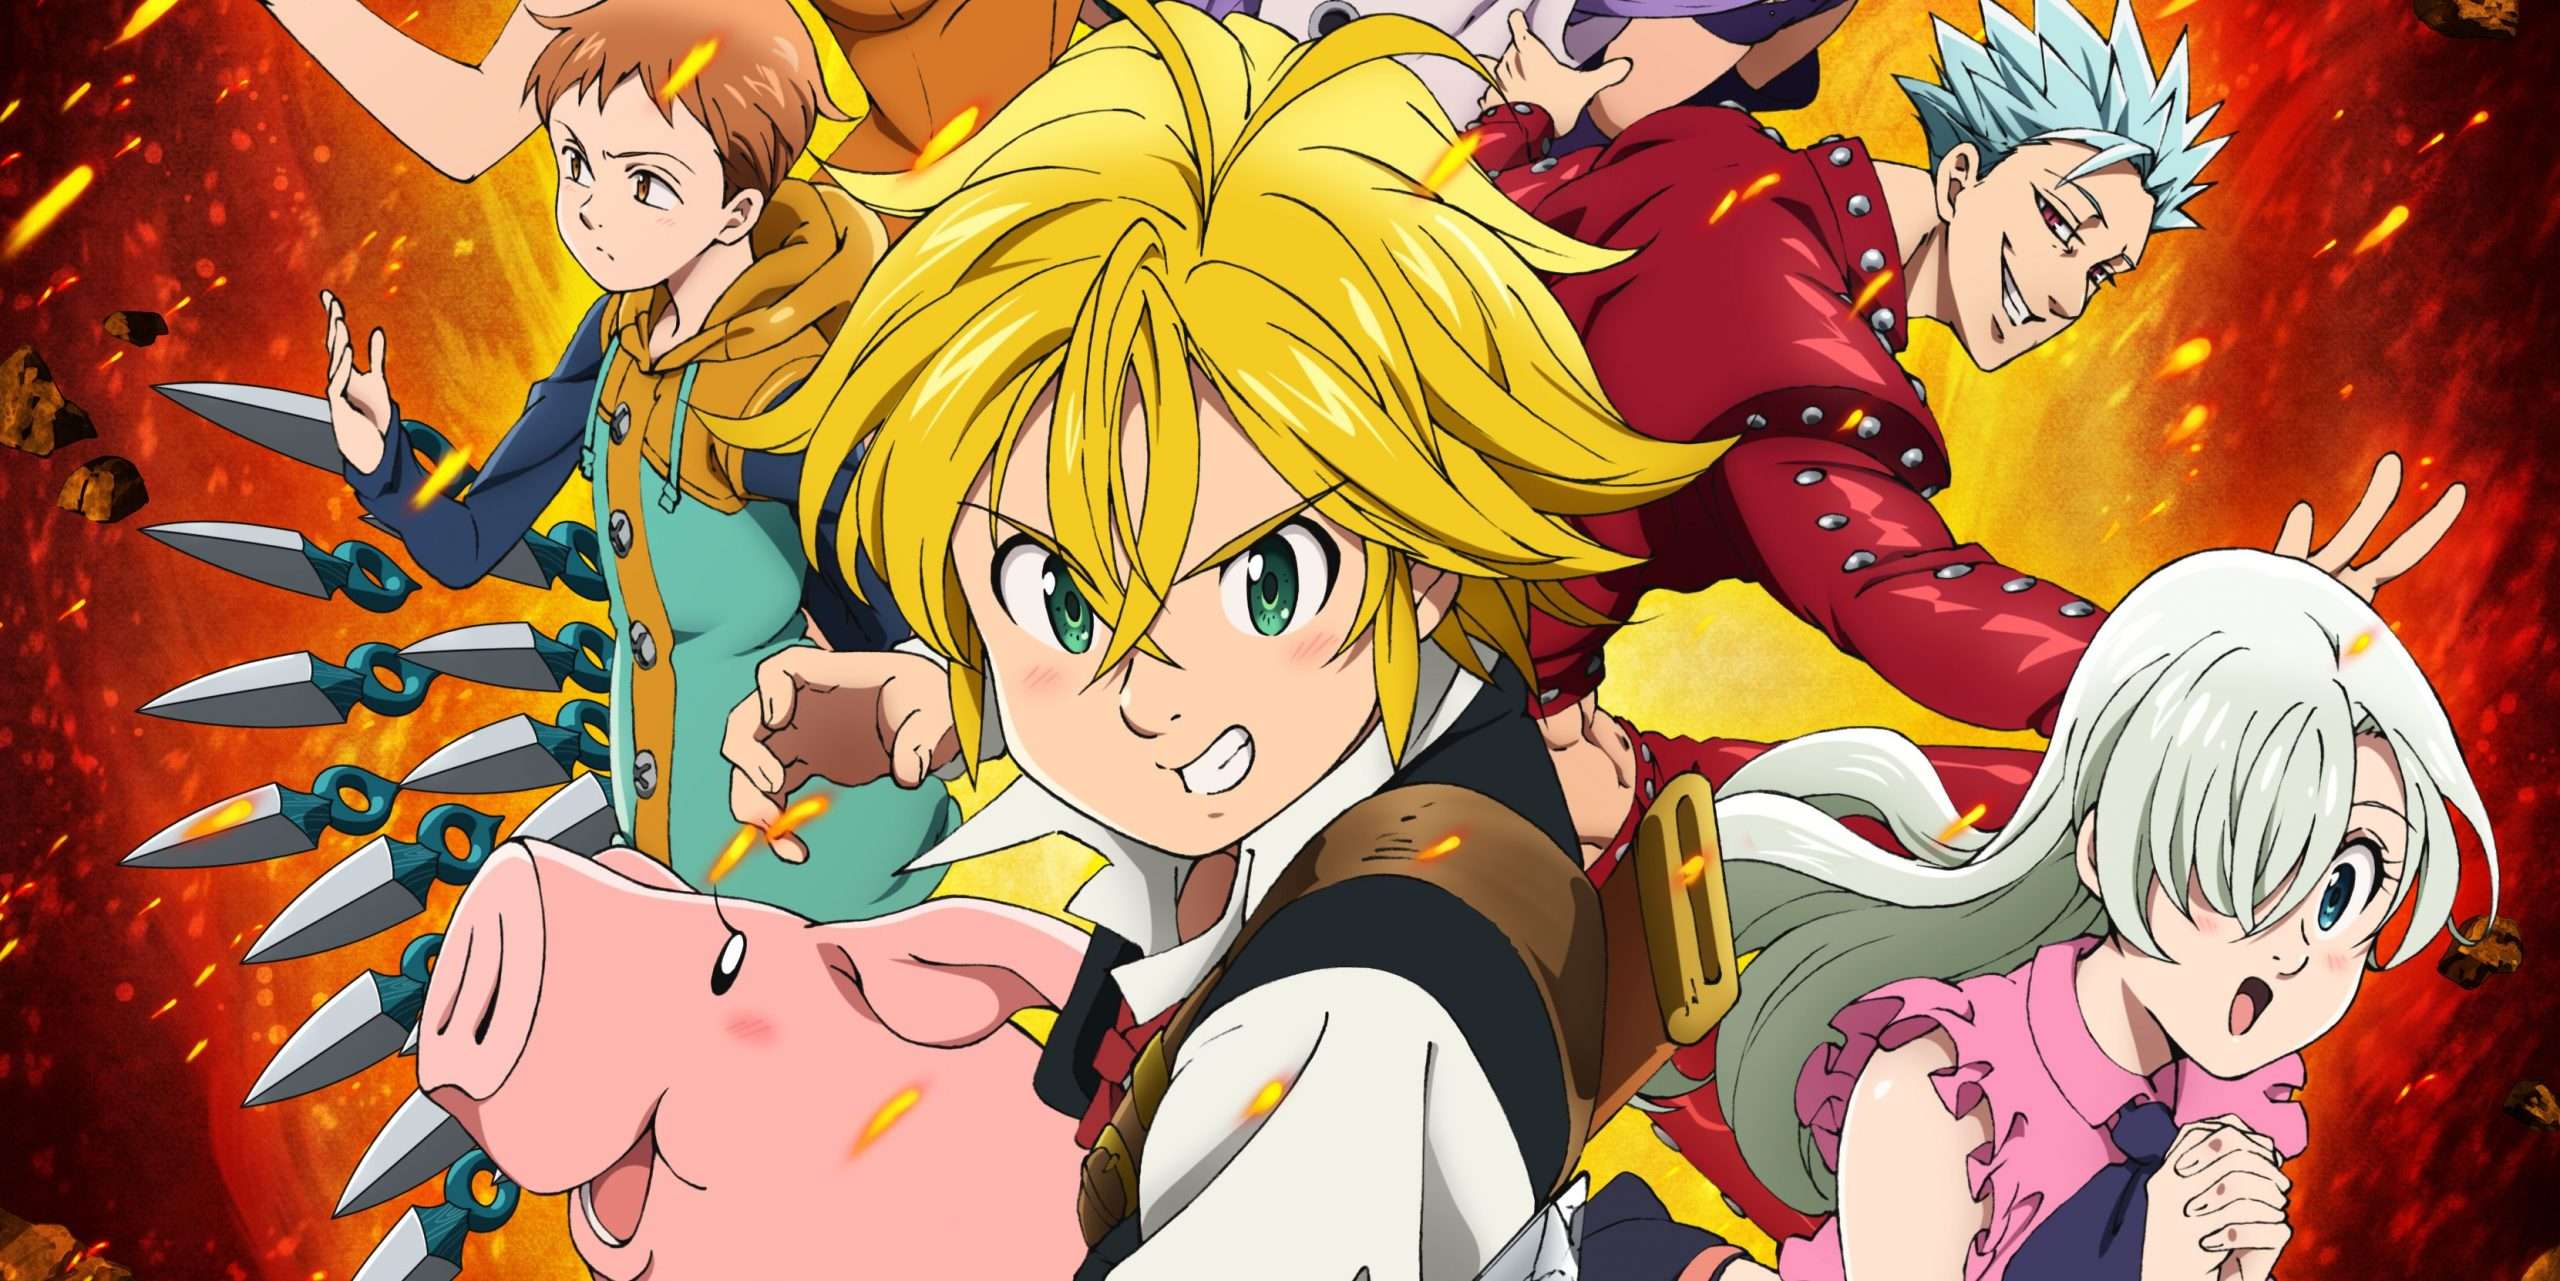 When is the Fith Season Of 'The Seven Deadly Sins' Coming to Netflix?